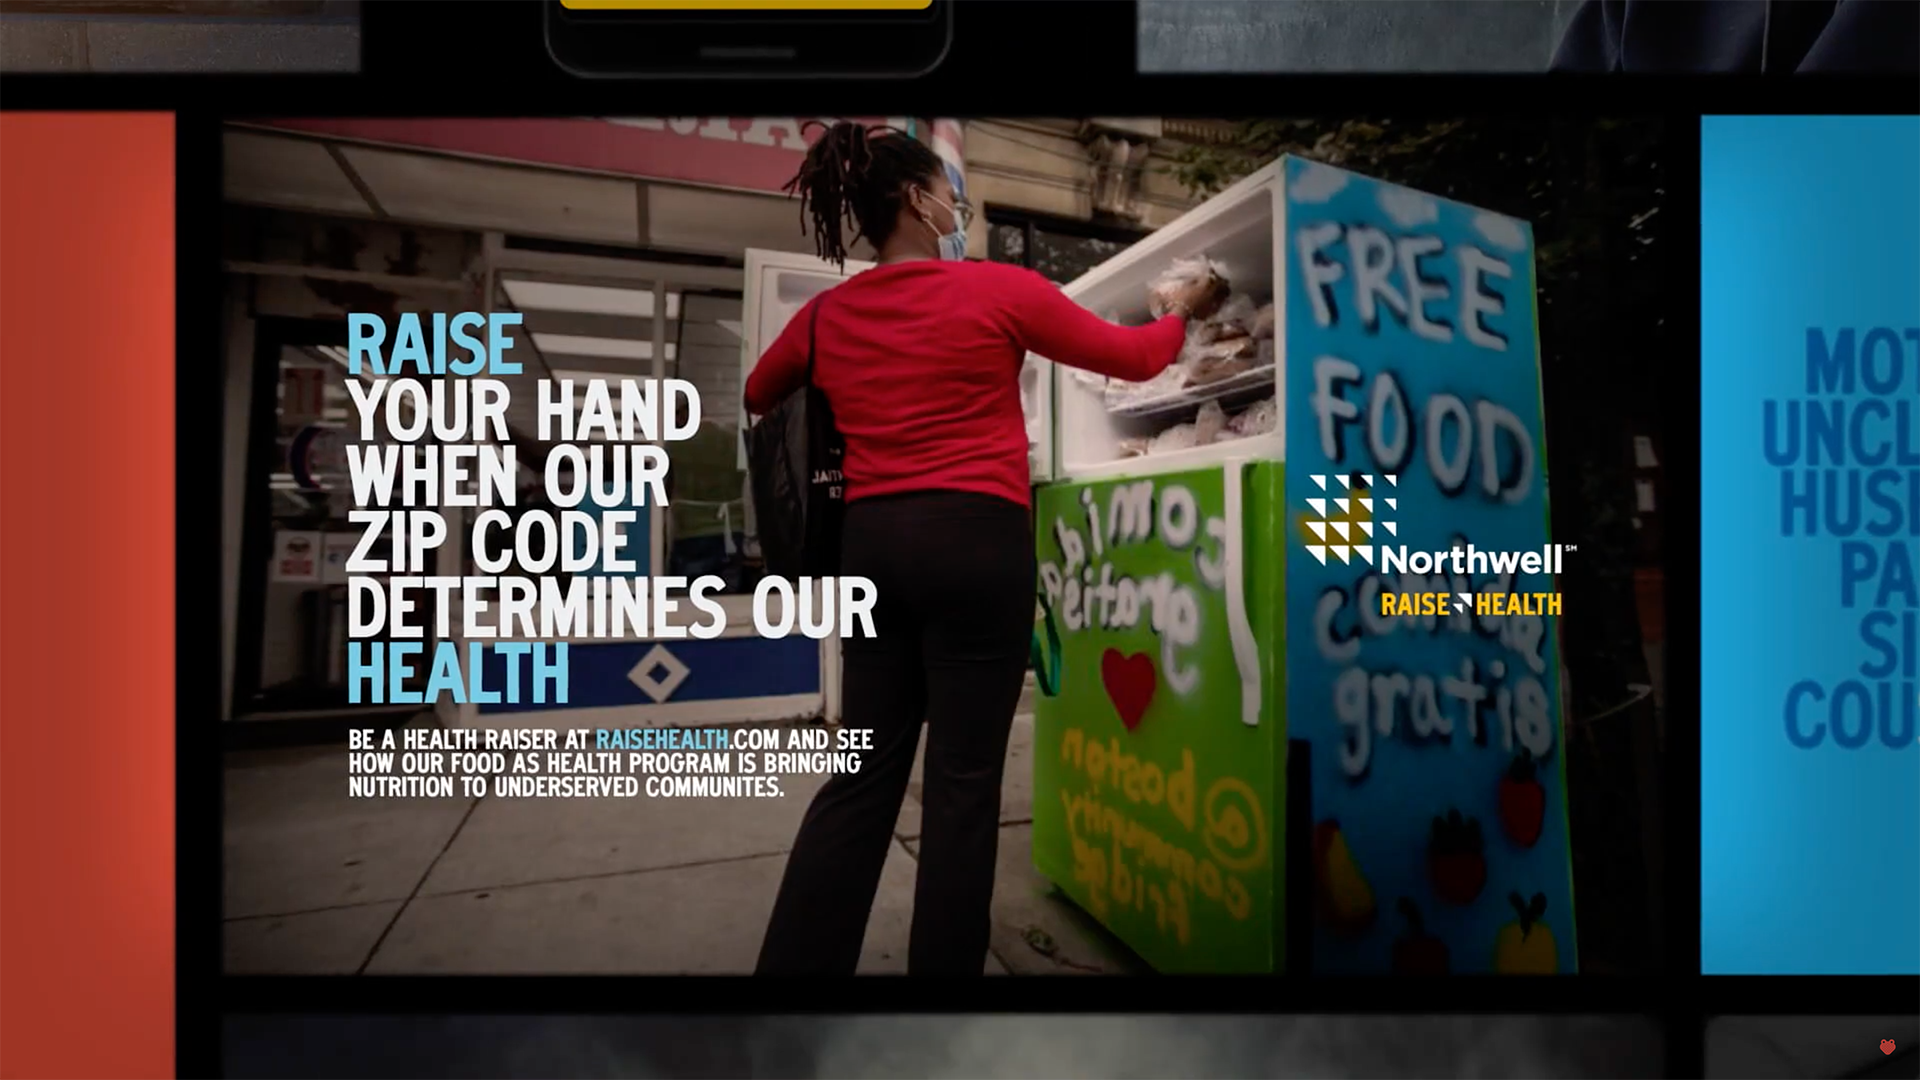 Masked woman grabbing food from a fridge. Overlaid text reads “Raise your hand when our zip code determines our health.”